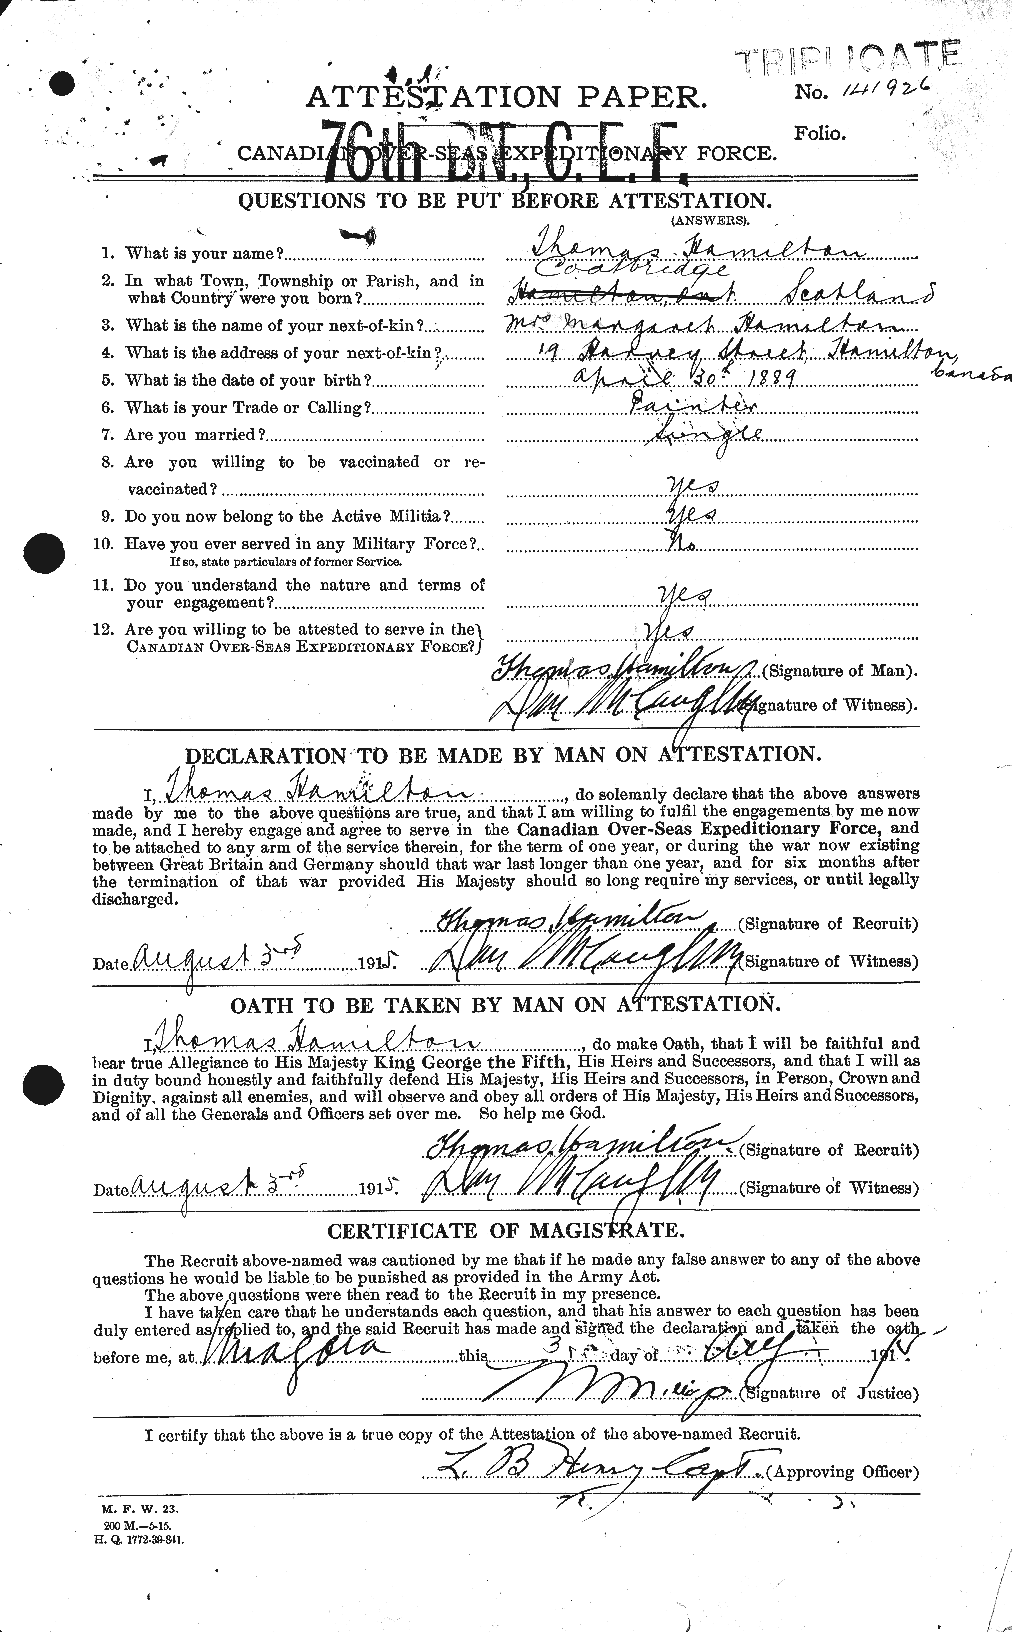 Personnel Records of the First World War - CEF 374787a